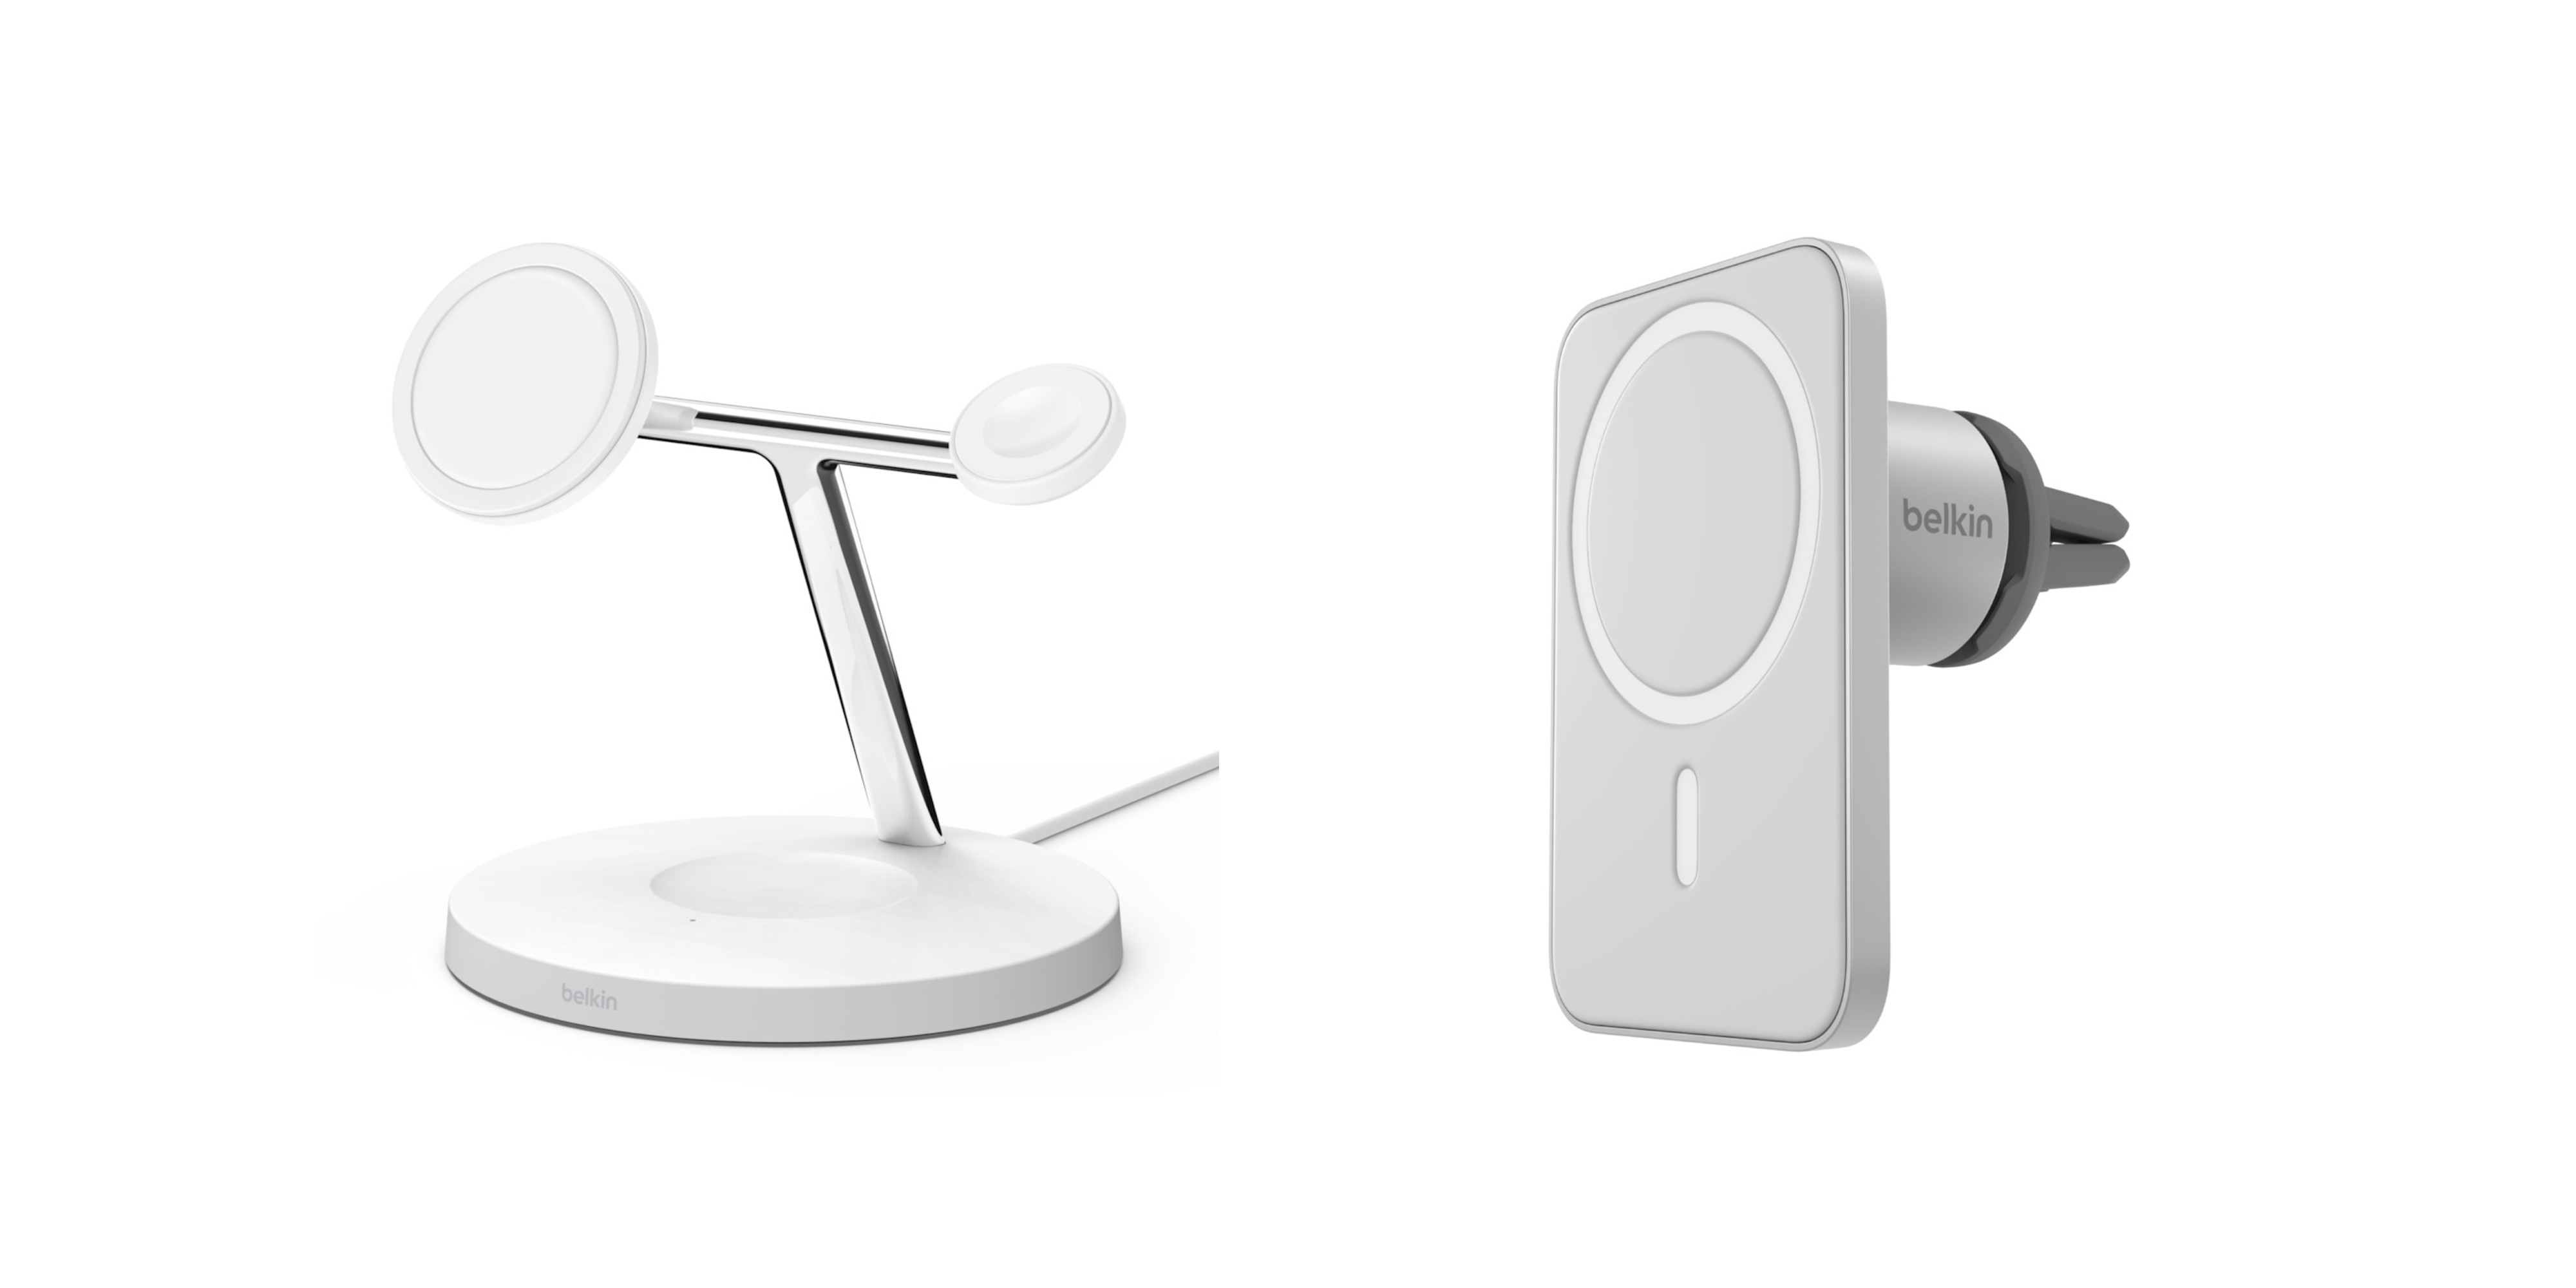 Update: Belkin Car Mount now from Apple] teases MagSafe accessories for iPhone 12 - 9to5Mac